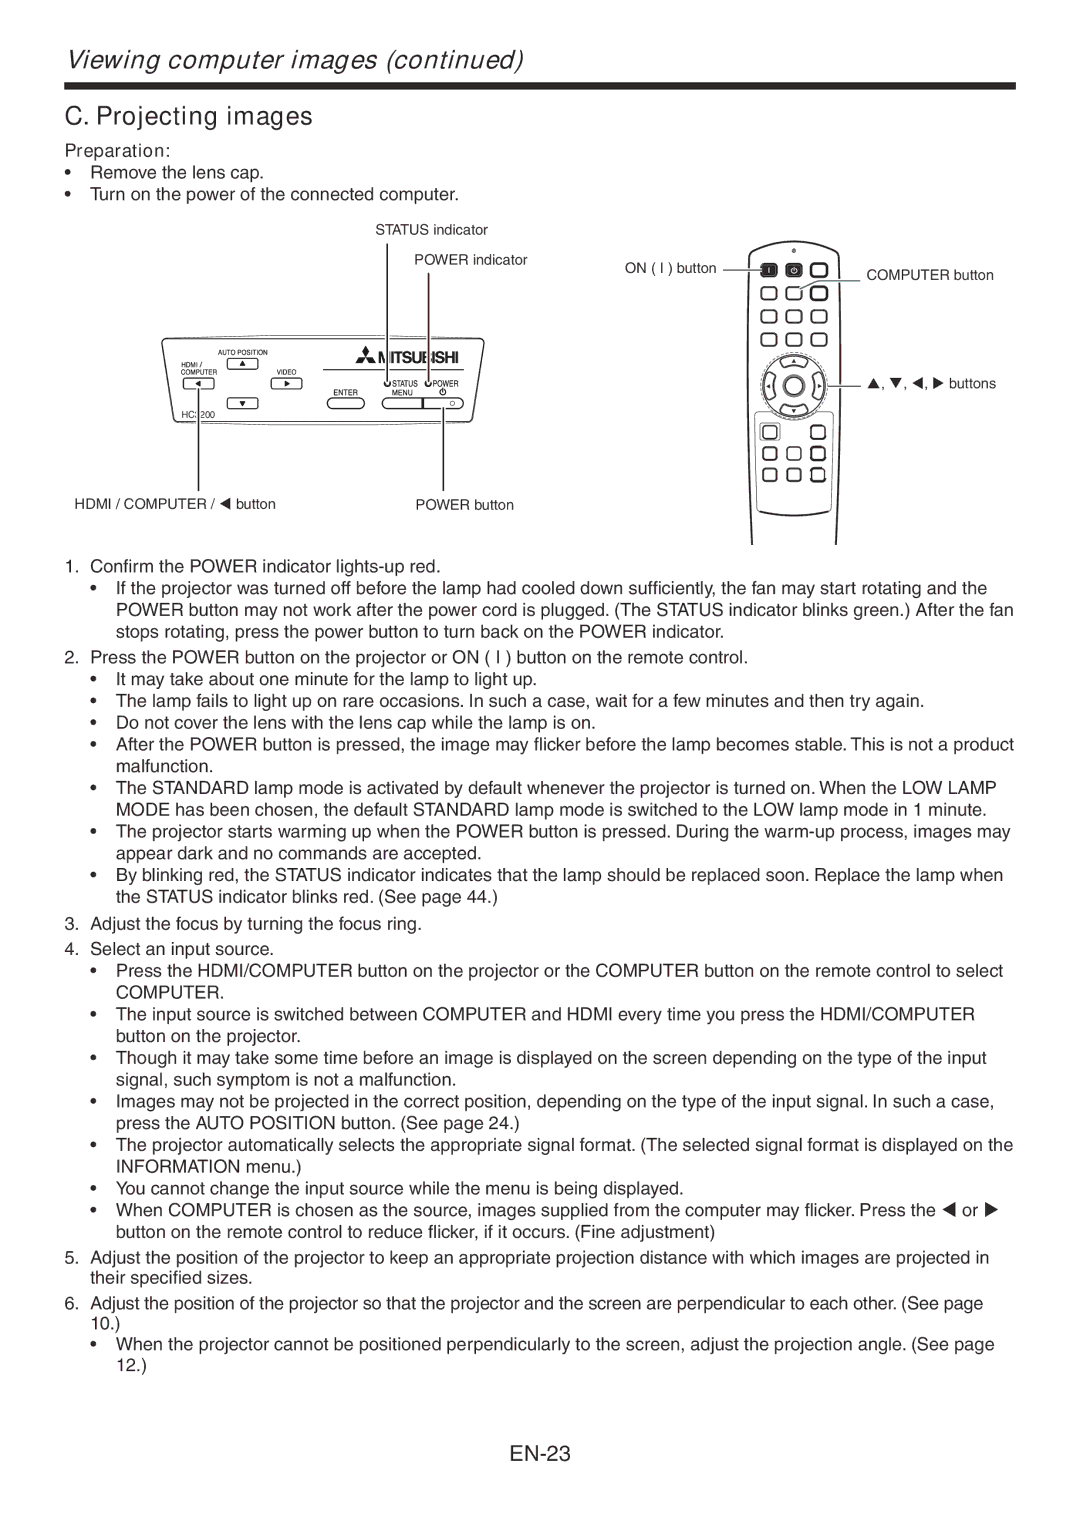 Mitsumi electronic HC3200 user manual Viewing computer images, Computer 